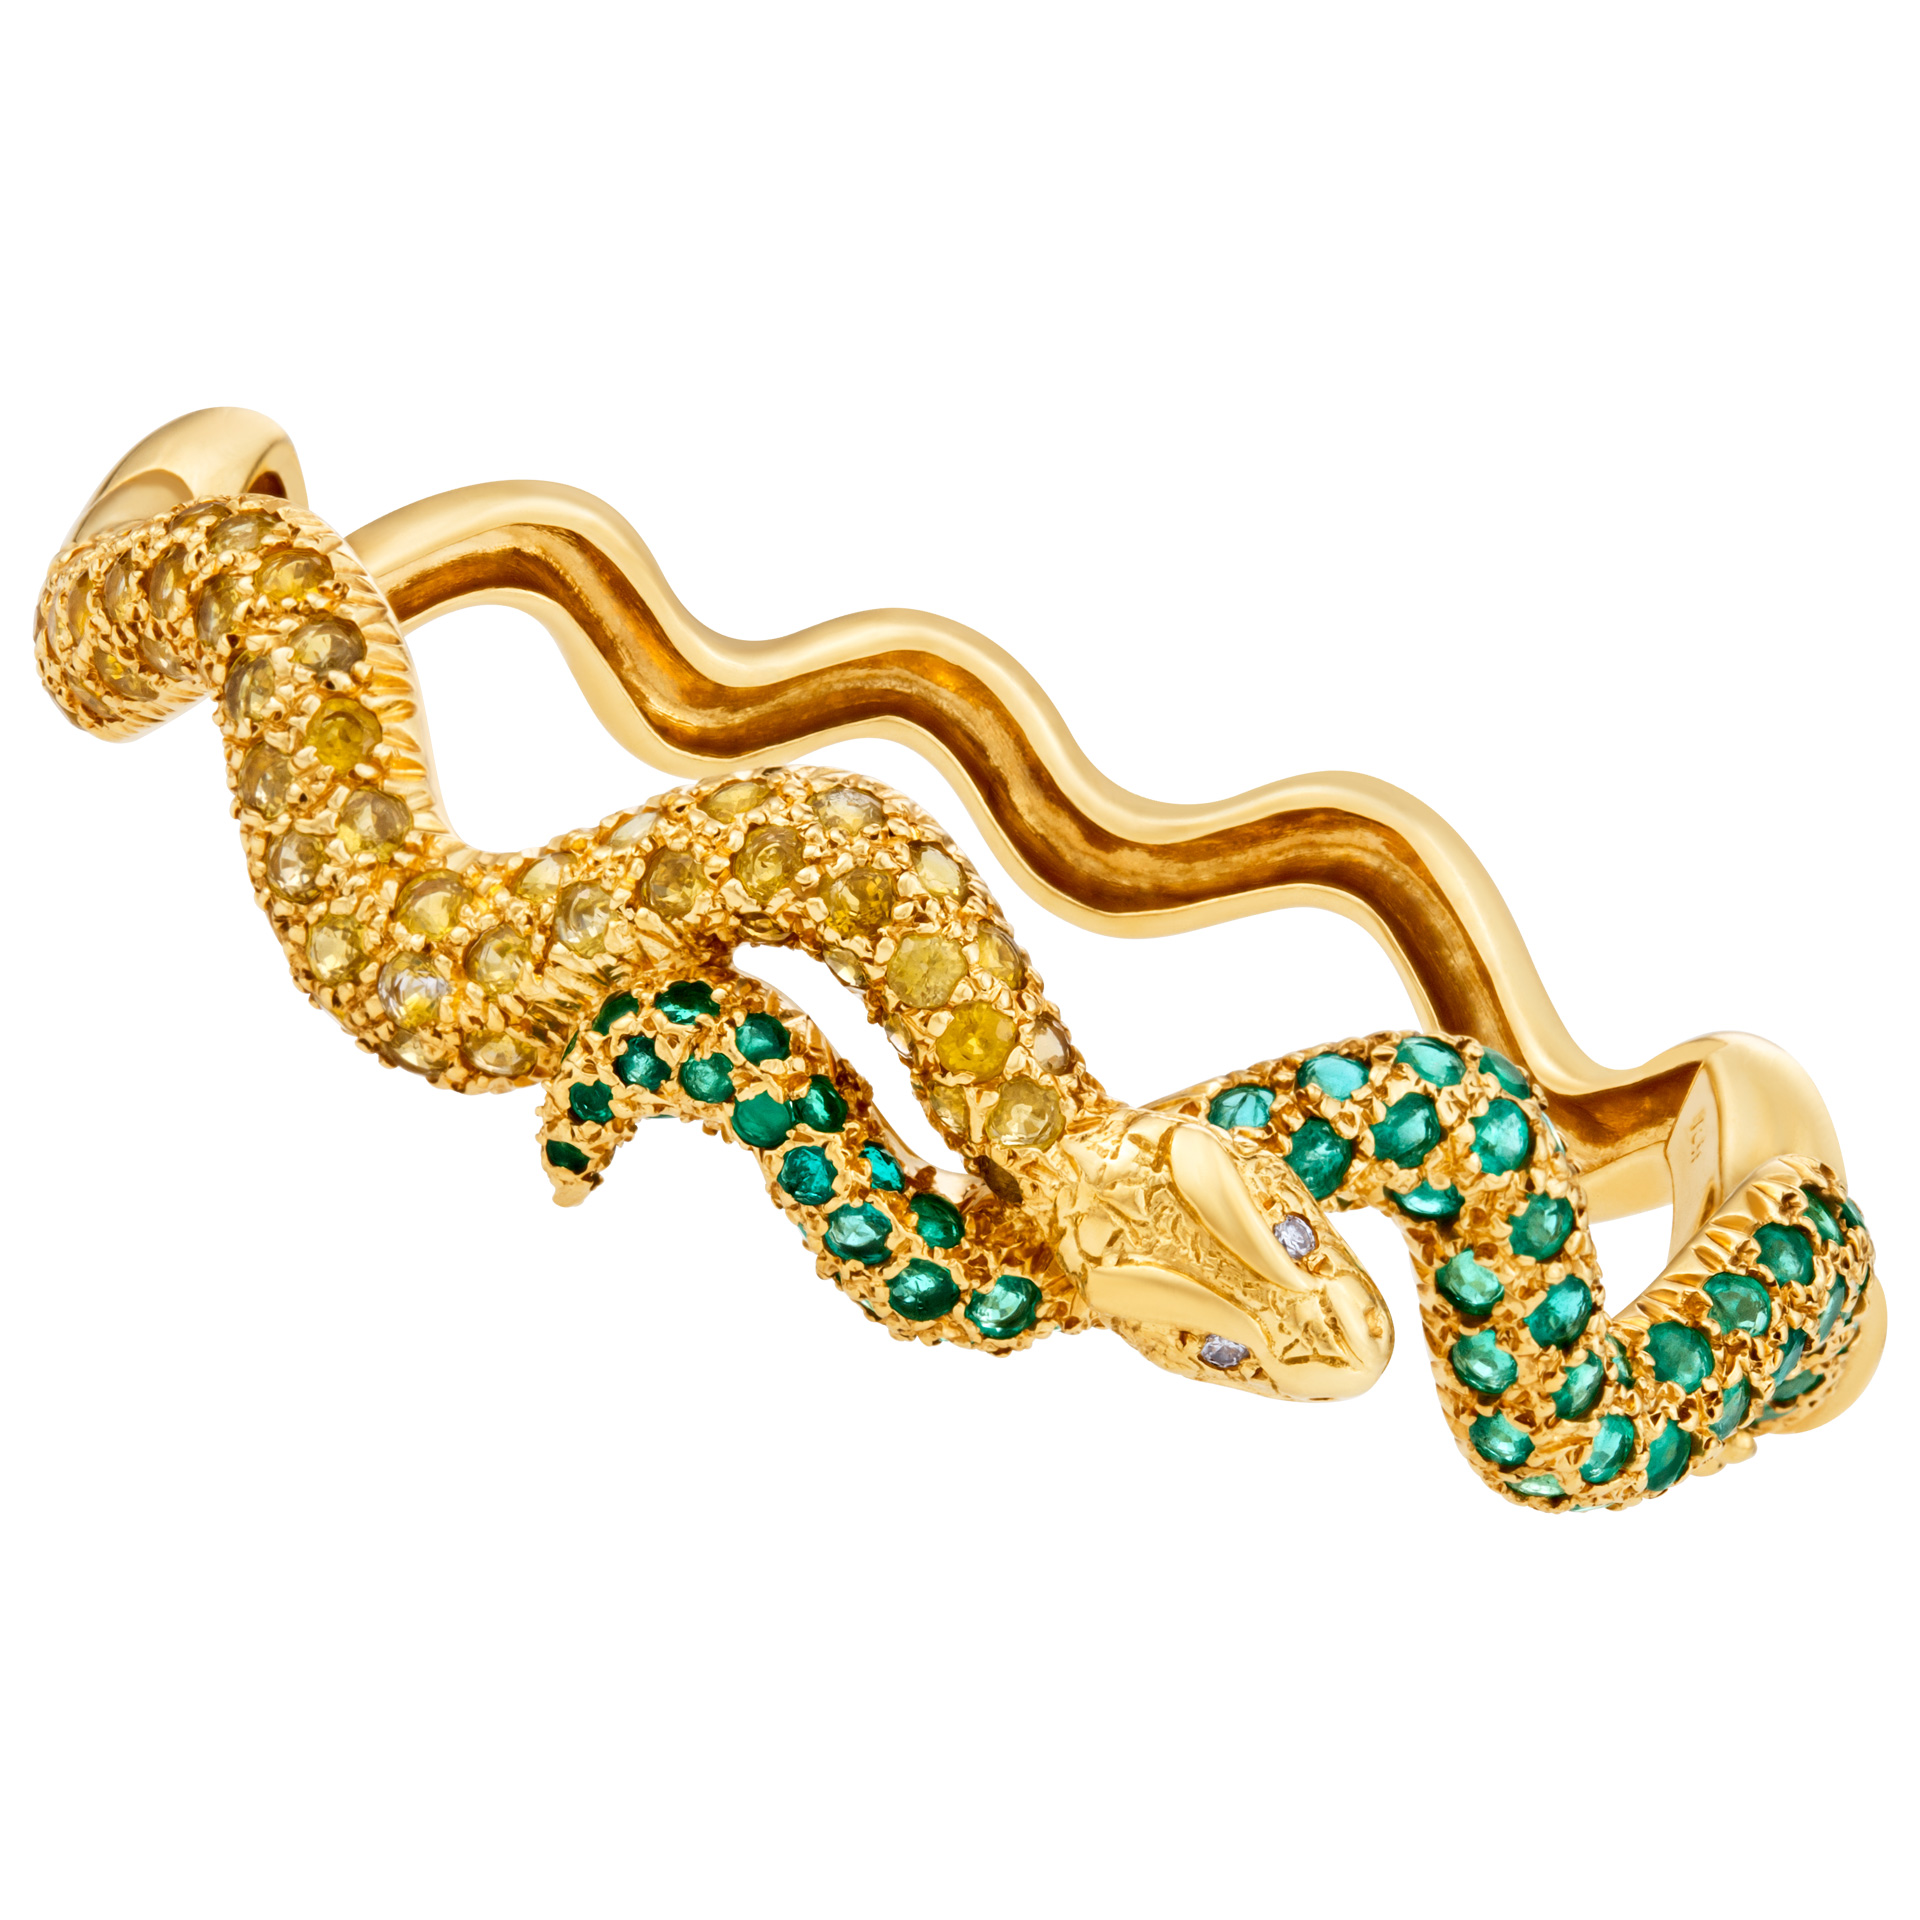 Sazingg serpent swirl bangle app. 3.5 in yellow sapphires and emeralds in 18k image 1